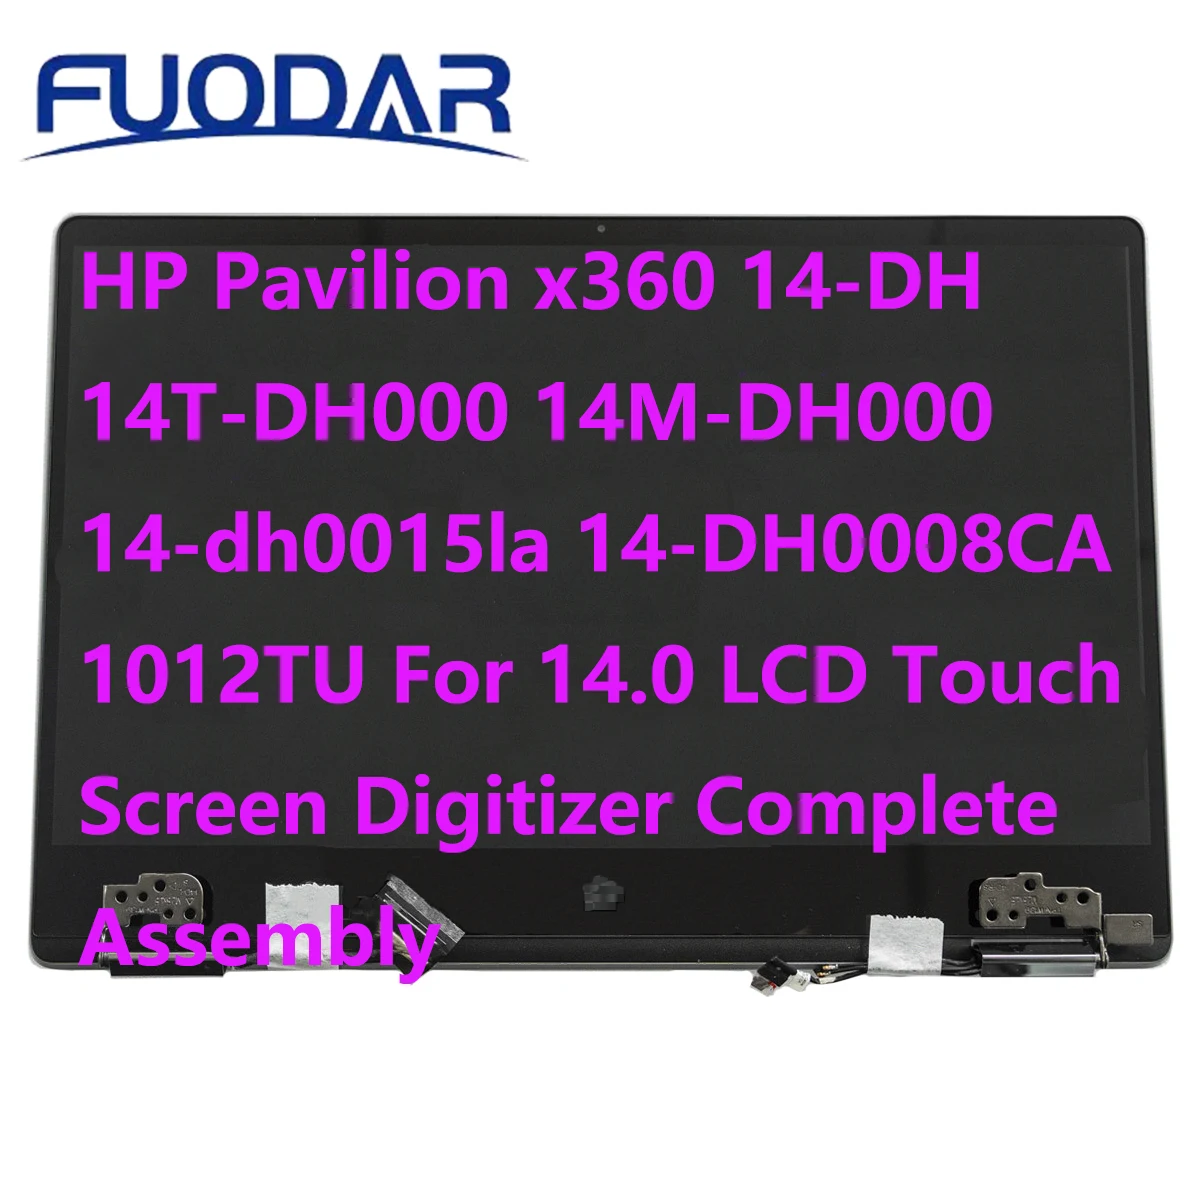 

HP Pavilion x360 14-DH 14T-DH000 14M-DH000 14-dh0015la 14-DH0008CA 1012TU For 14.0 LCD Touch Screen Digitizer Complete Assembly